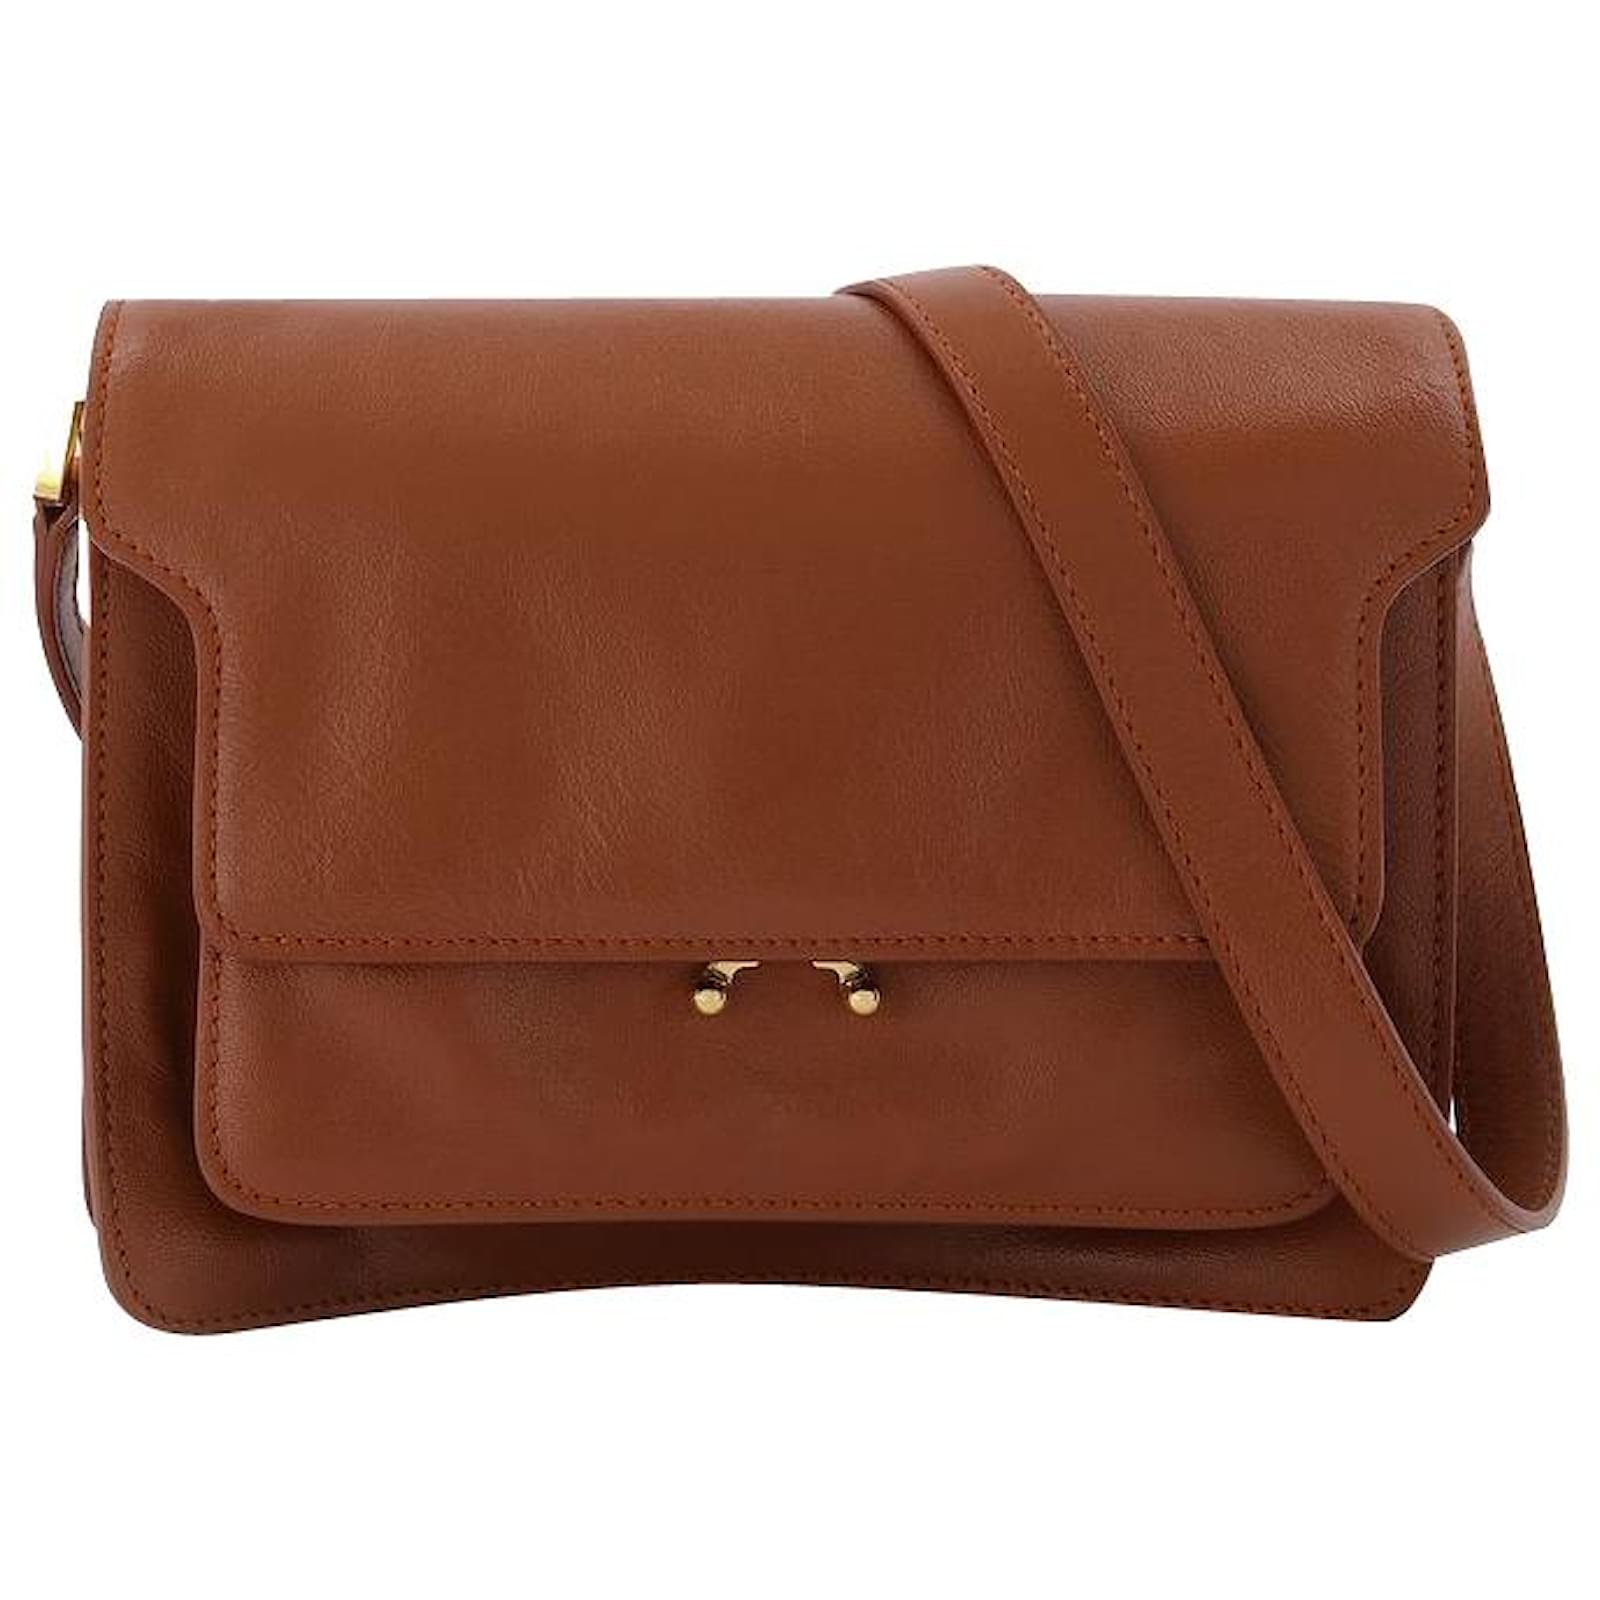 TRUNK SOFT medium bag in brown leather